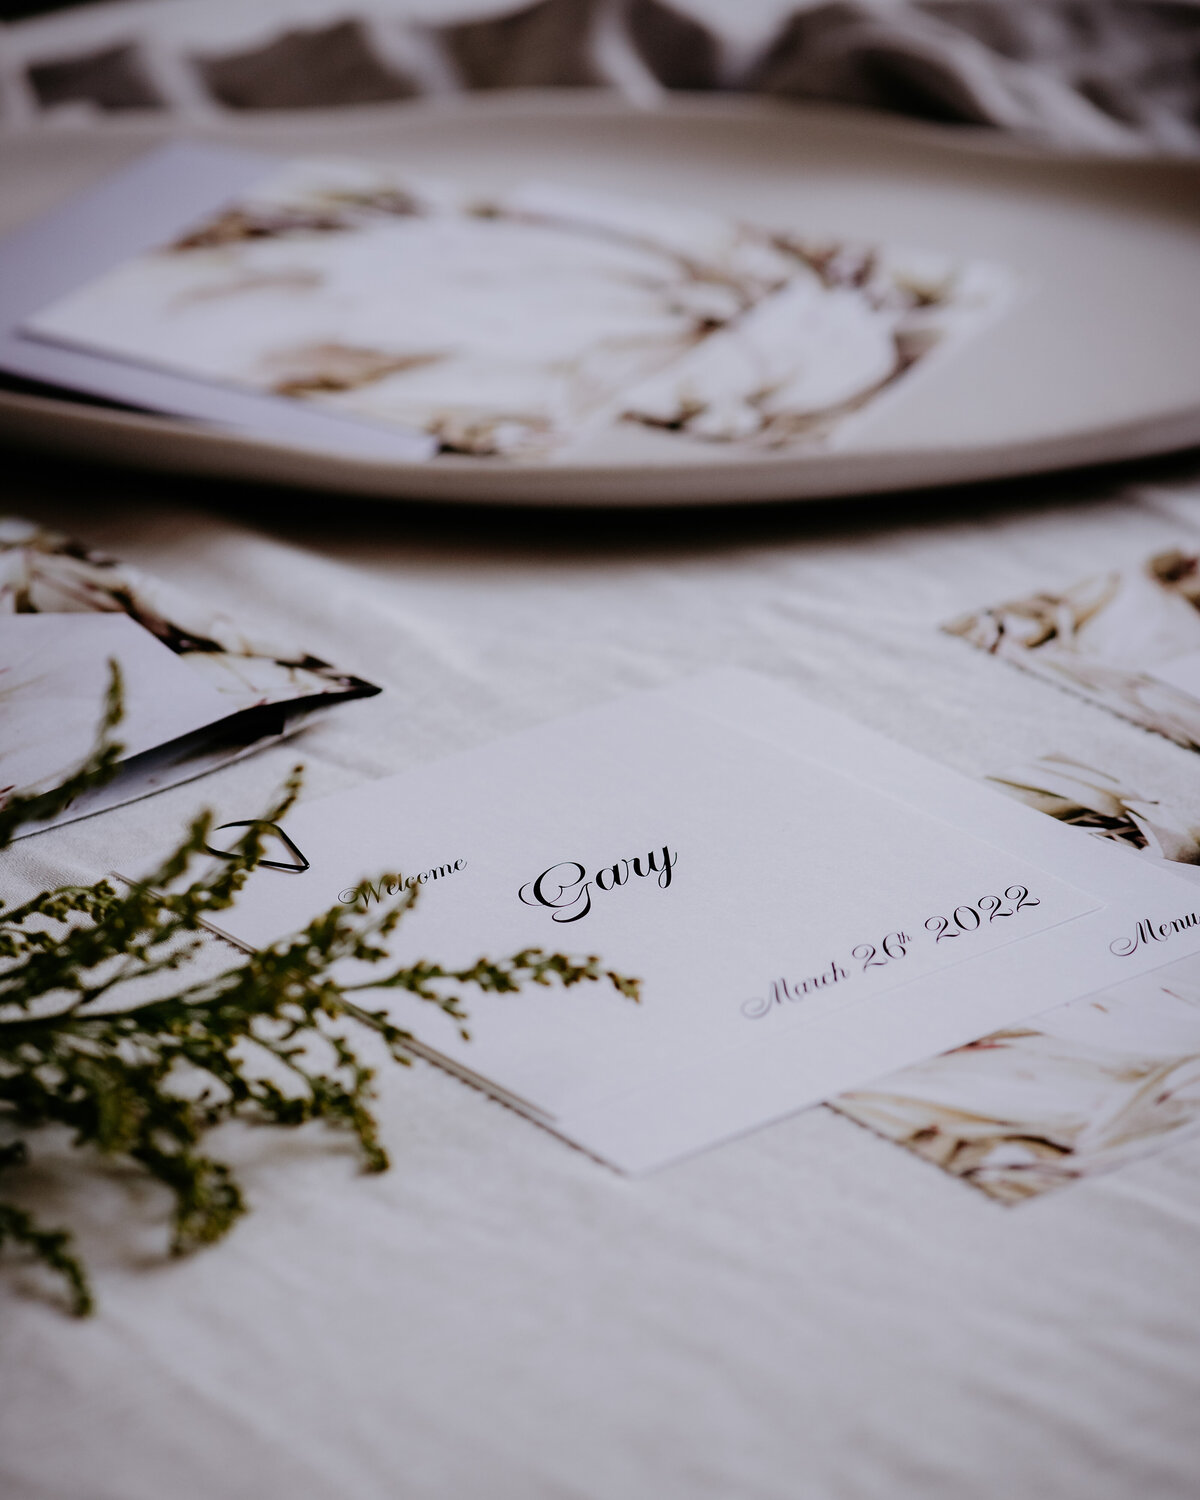 Layered wedding menu and place card with elegant script font and cream flowers